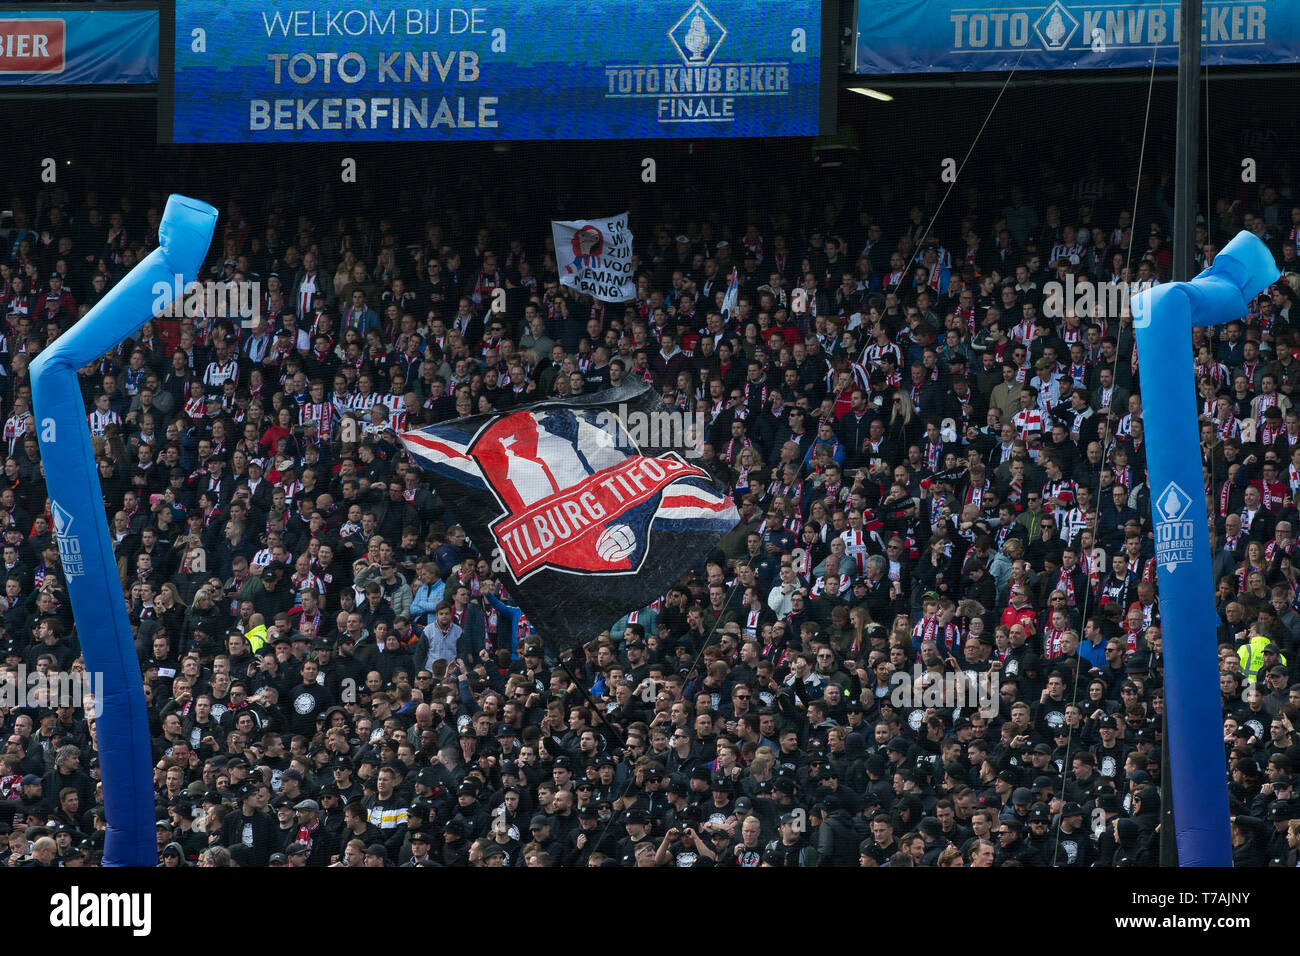 Overredend Modernisering frequentie 5 may 2019 Rotterdam, The Netherlands Soccer Dutch Cupfinal Willem II v  Ajax KNVB Bekerfinale 2019 Fans Willem II Stock Photo - Alamy